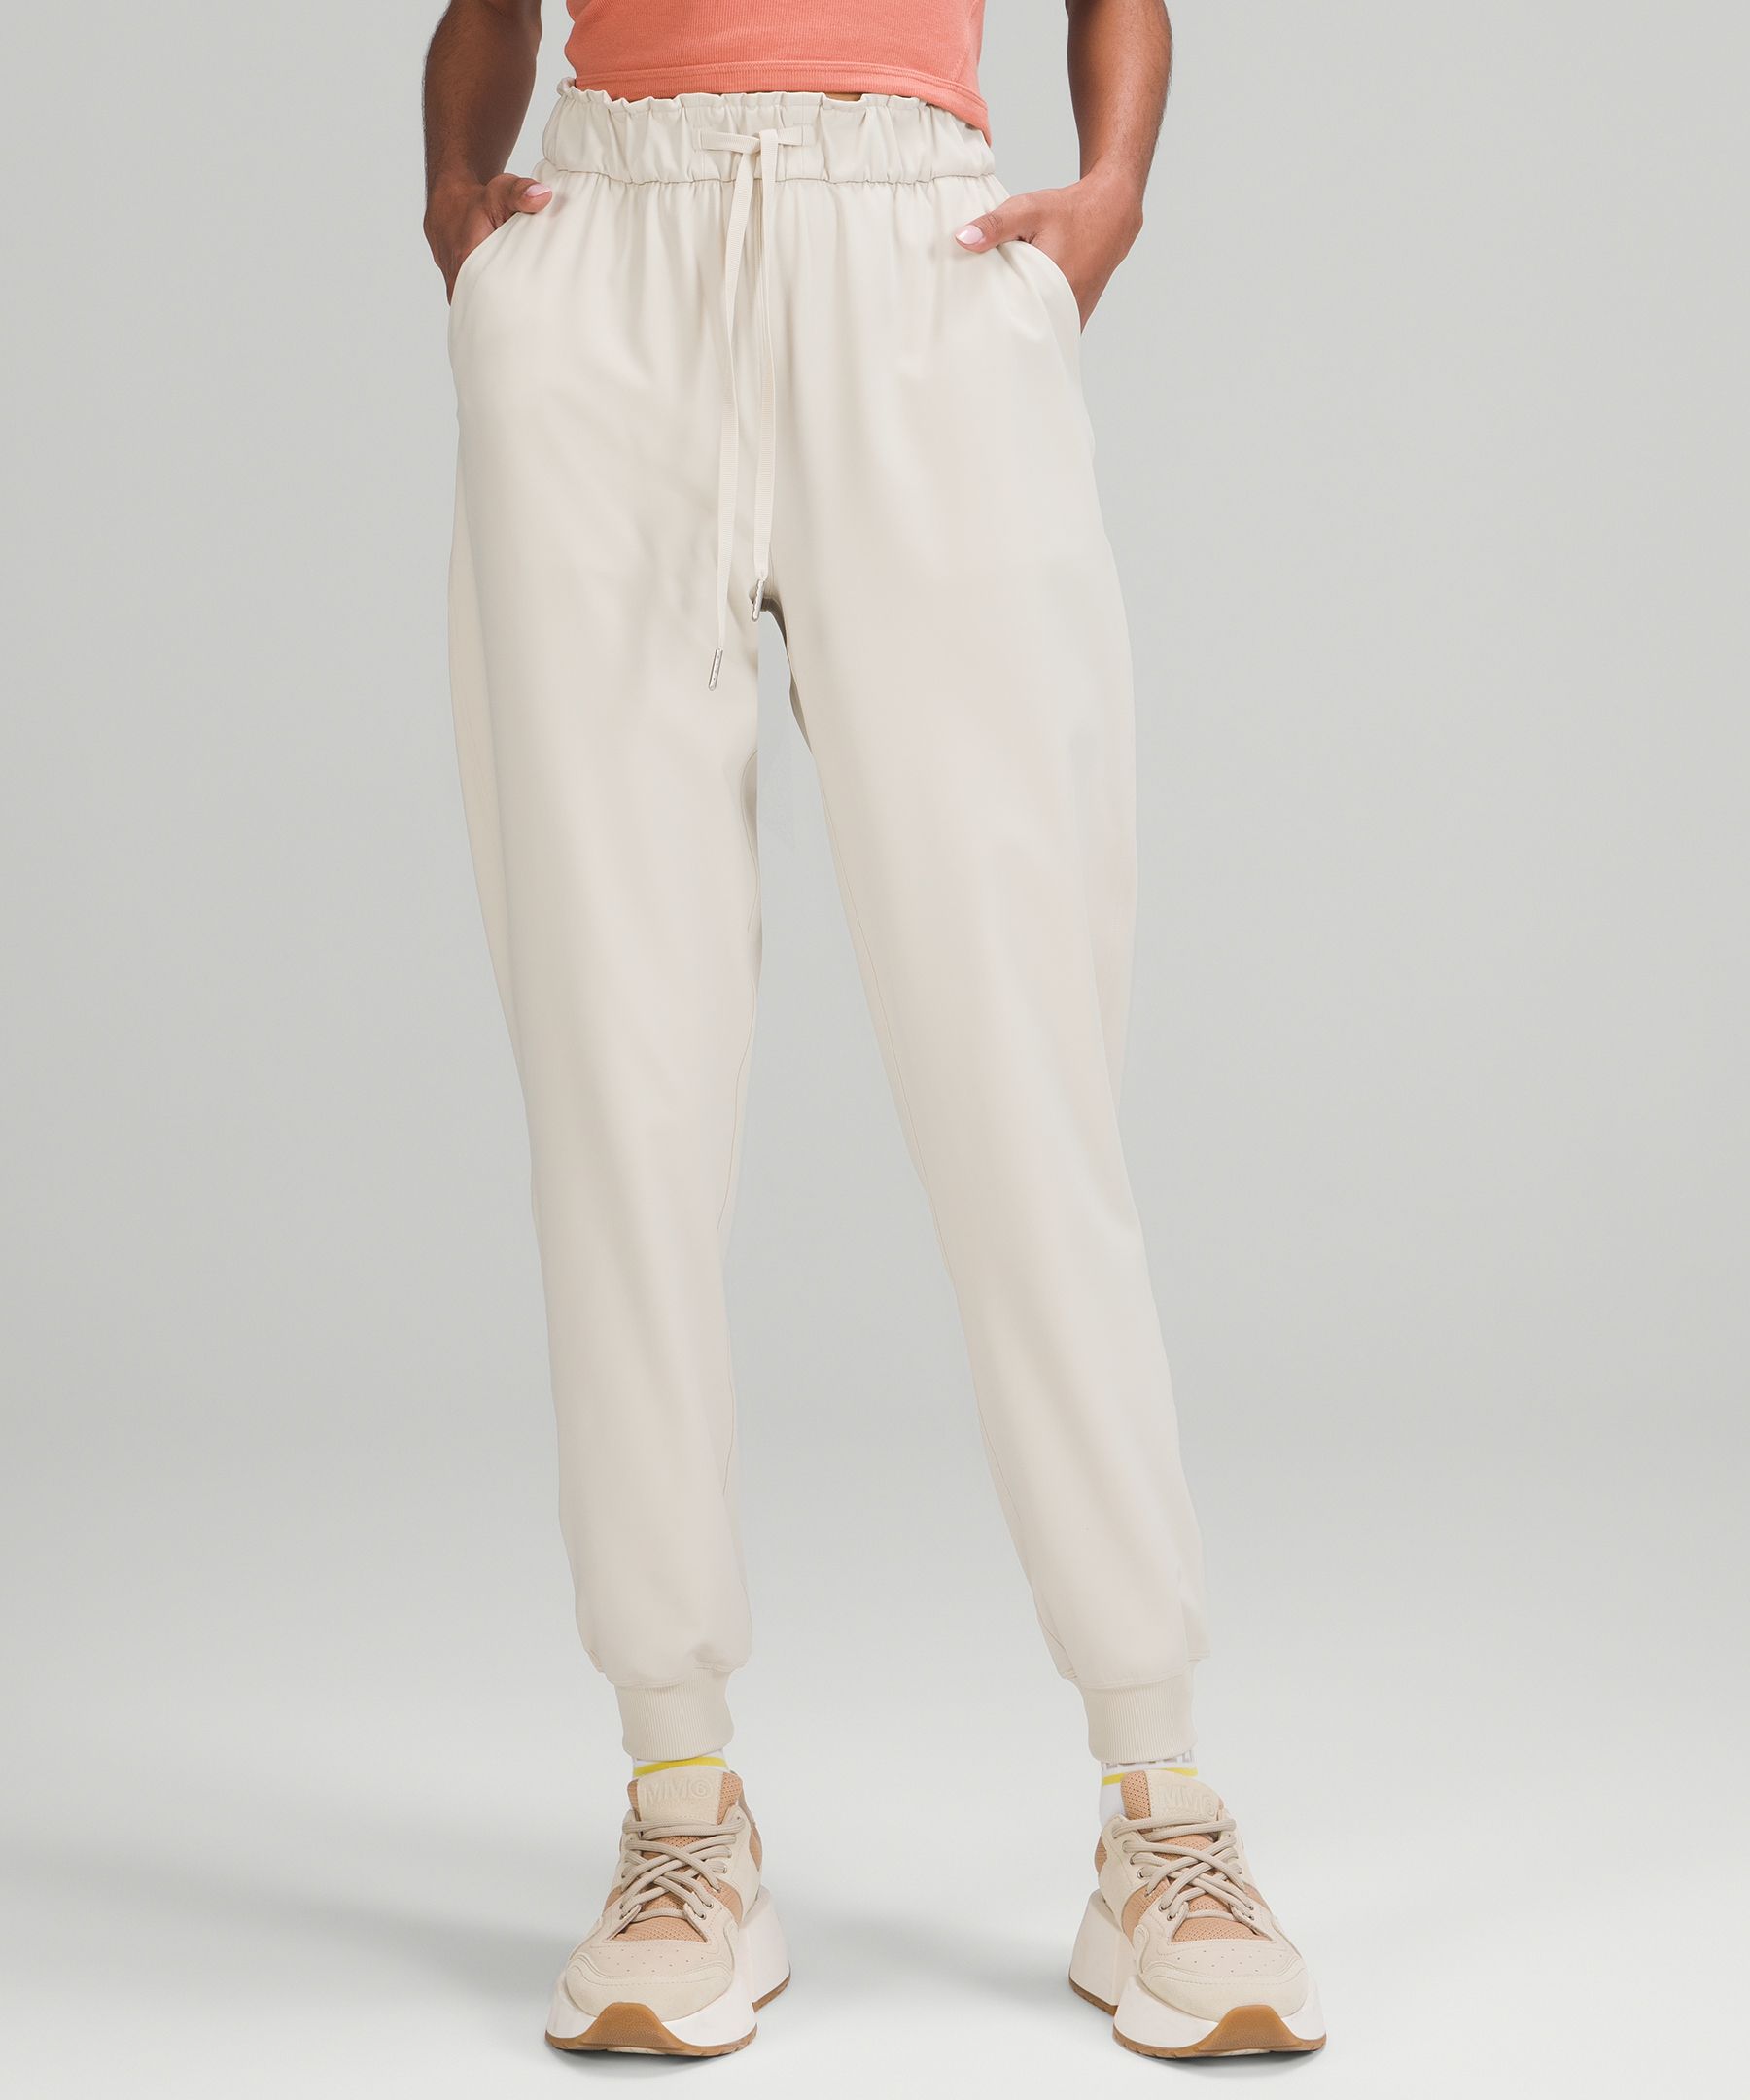 Lululemon Stretch High-rise Joggers Full Length In Natural Ivory | ModeSens